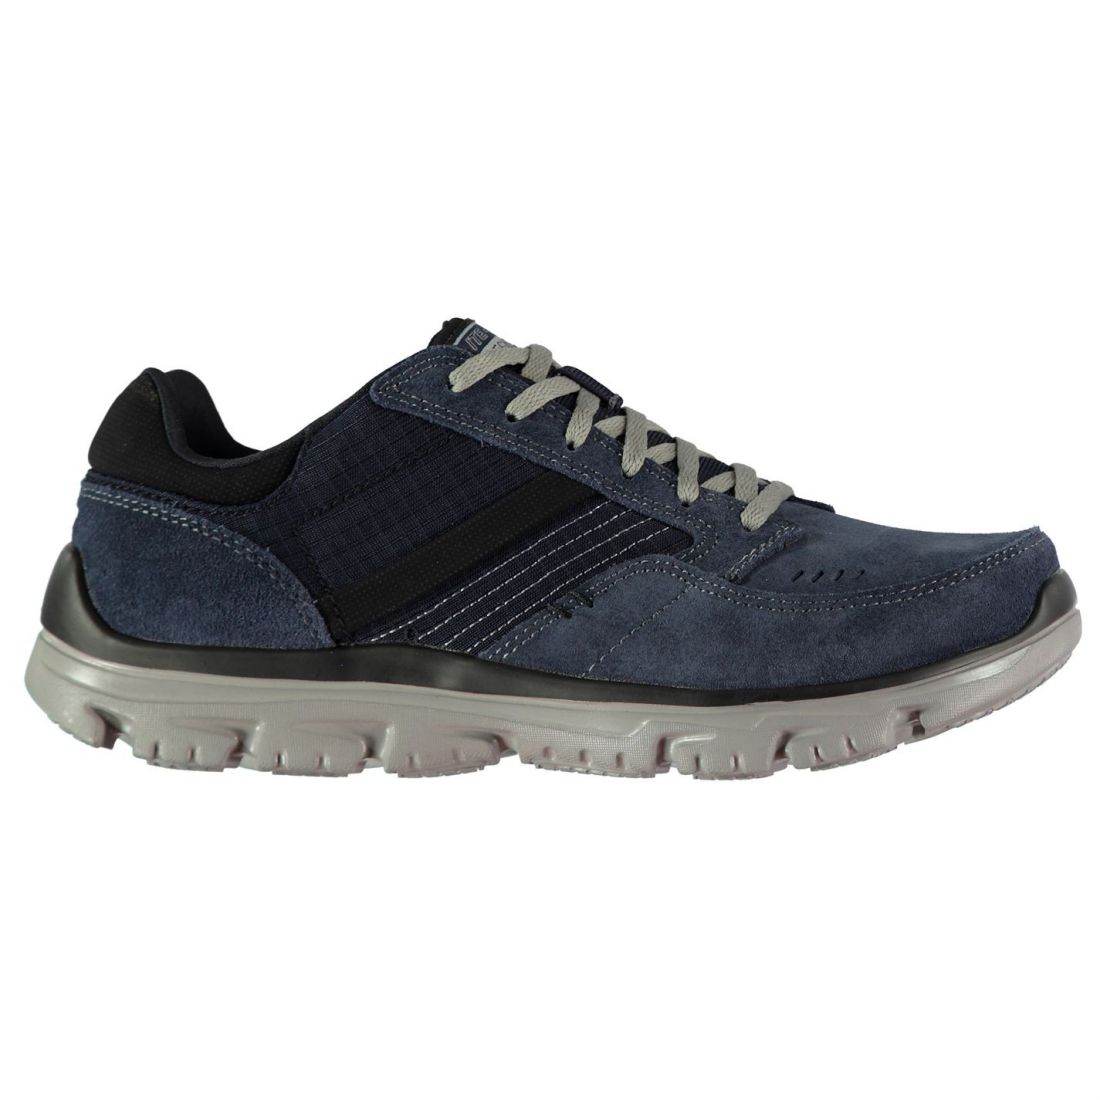 Skechers L Fit Sneakers Mens Gents Everyday Shoes Laces Fastened Padded ...